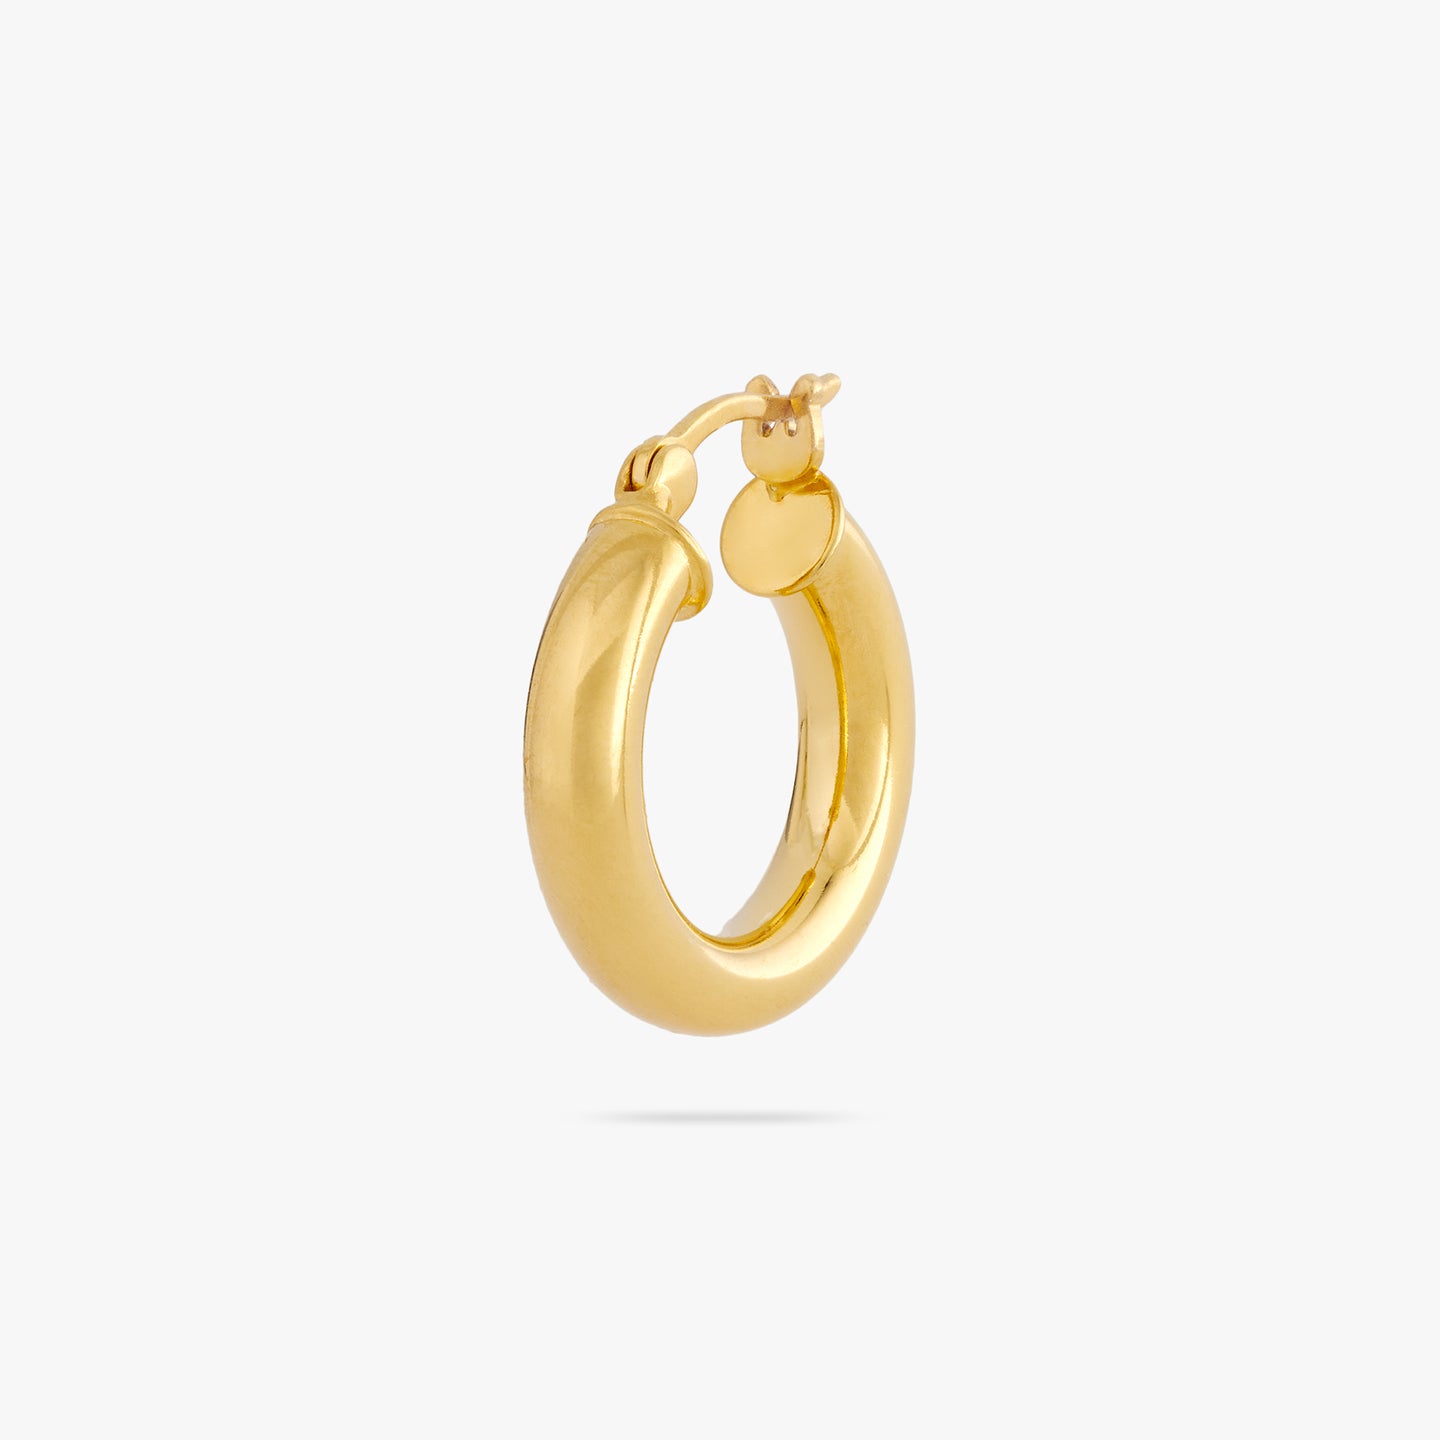 This is a small gold chunky tube hoop color:null|gold